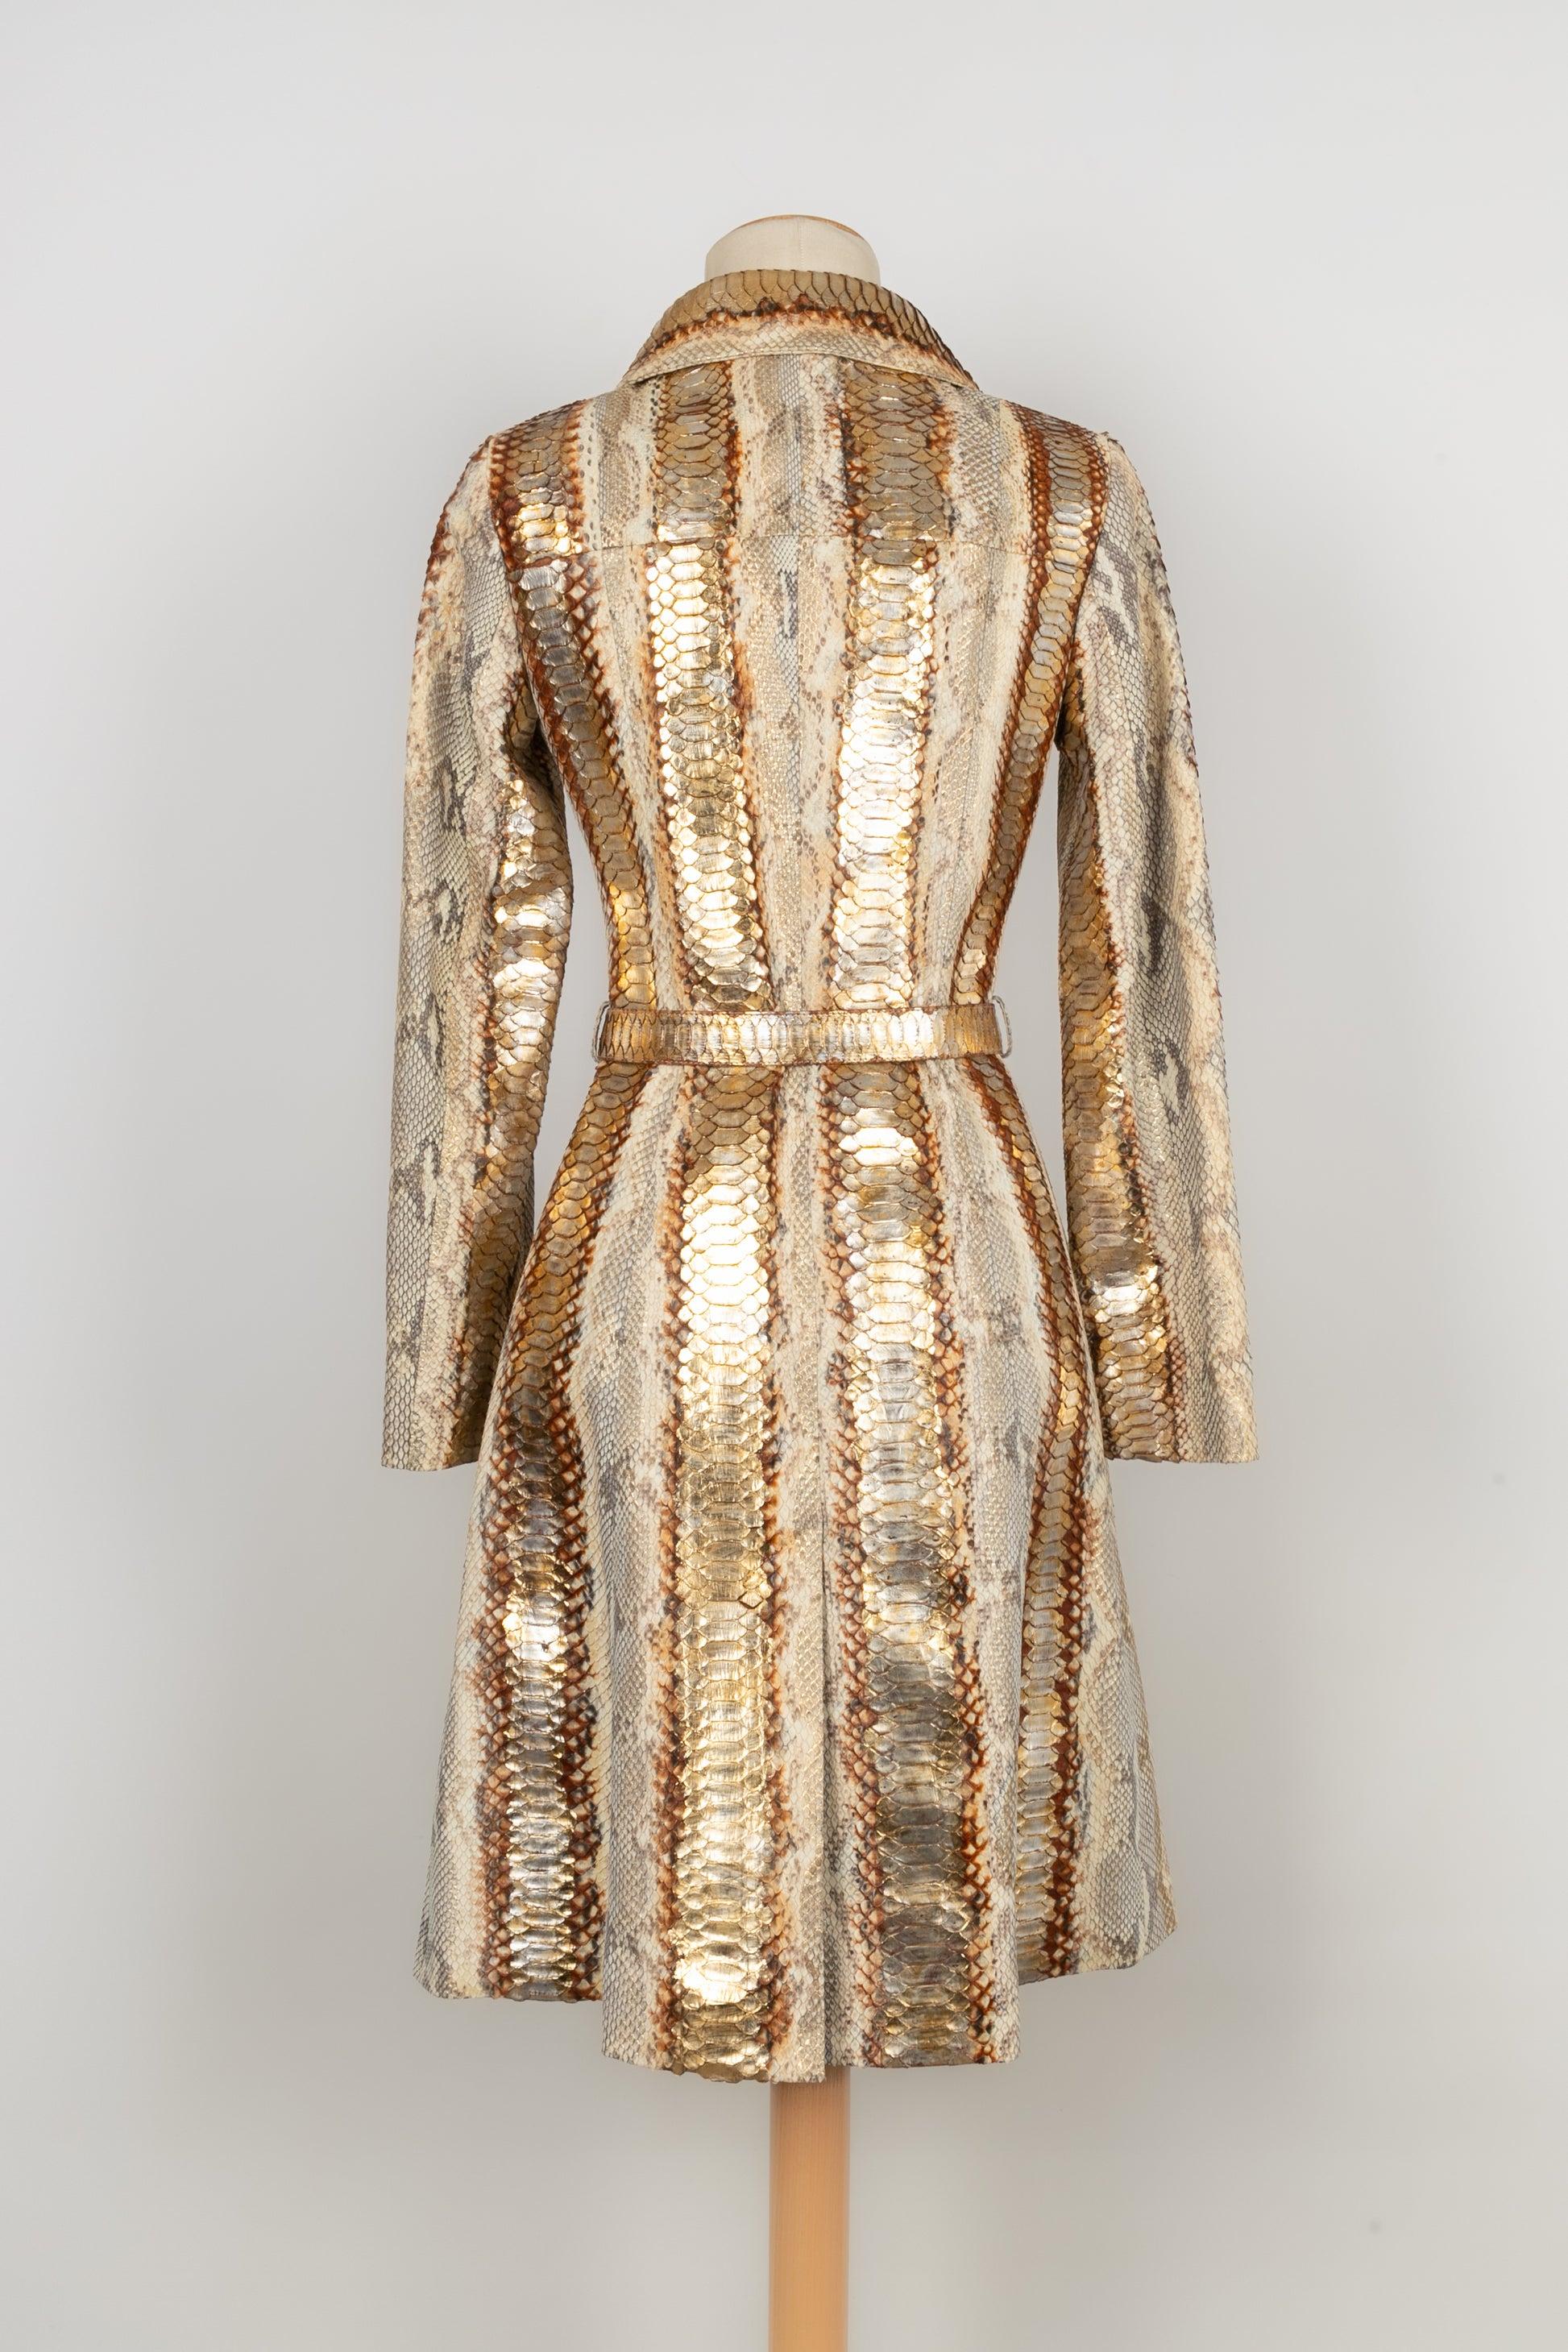 Women's Dior Python Coat and Silk Lining, 2008 For Sale